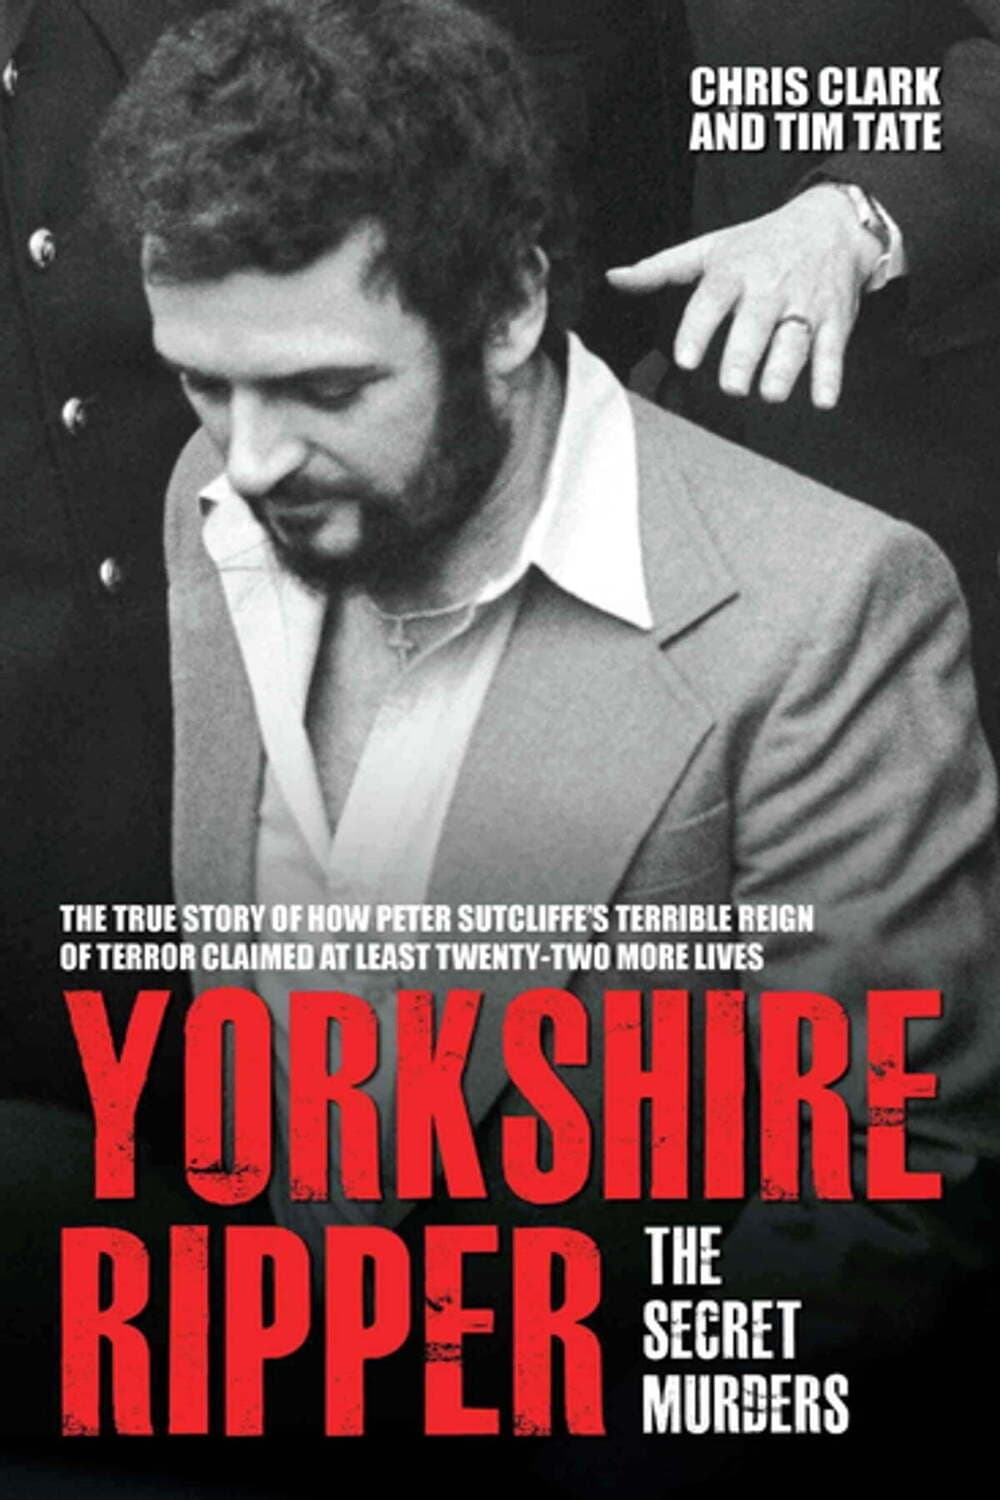 Yorkshire Ripper: The Secret Murders TV Shows About Killer